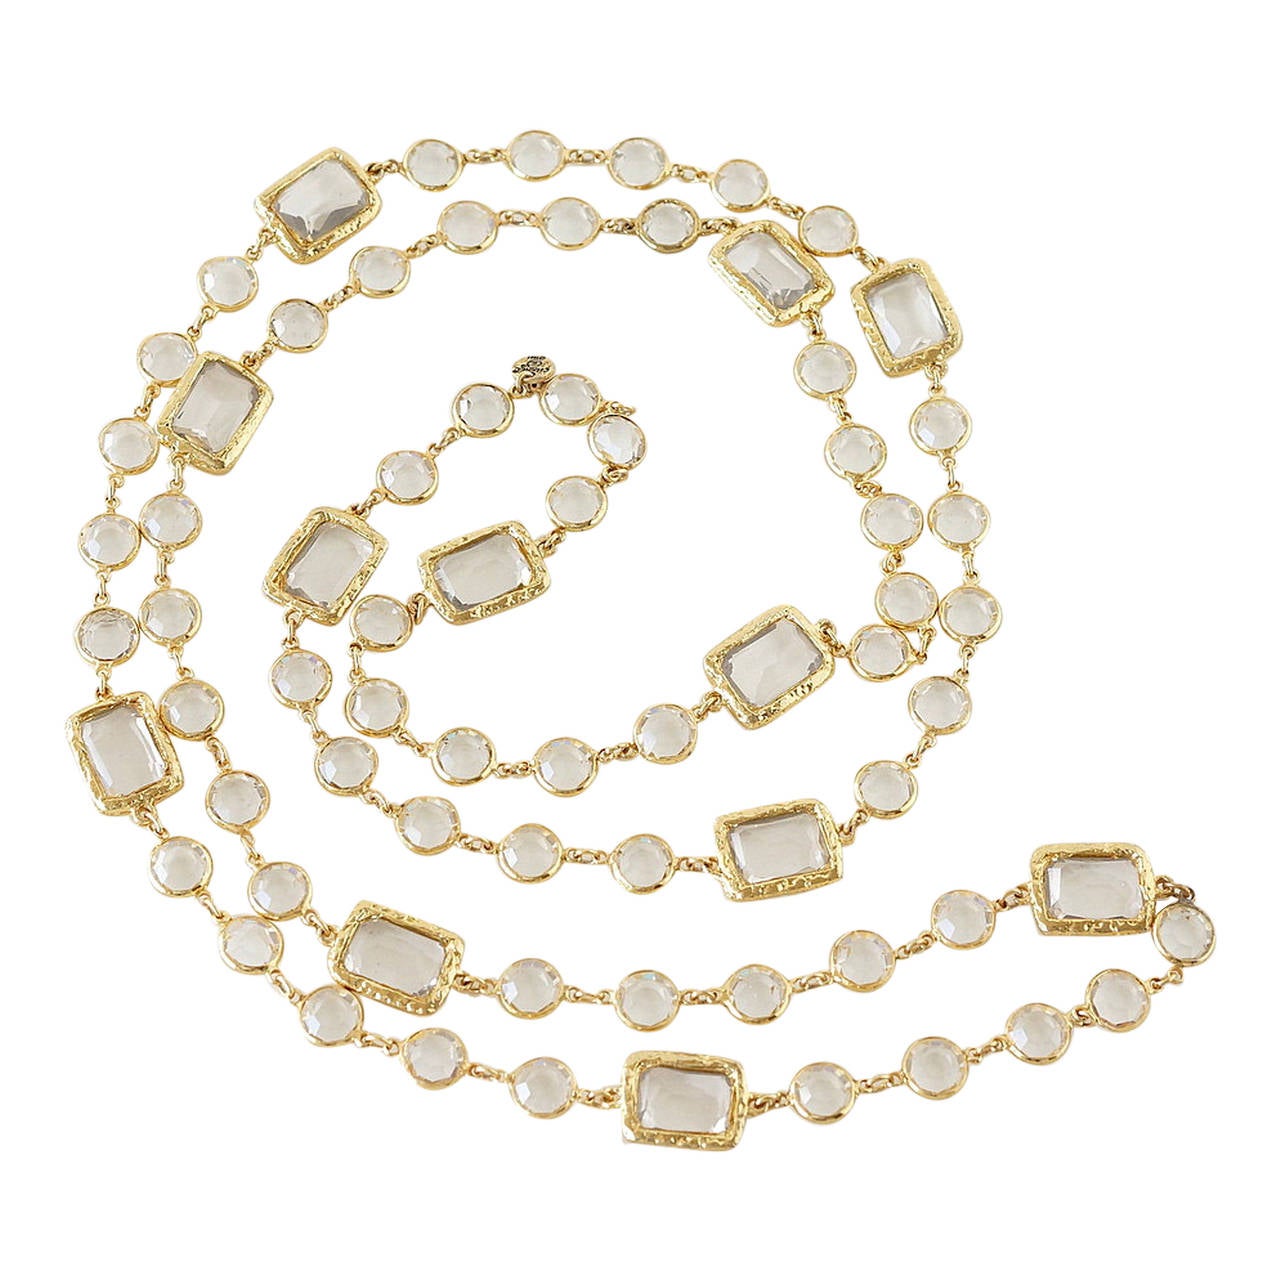 Chanel Chicklet Sautoir 1981 Vintage Necklace Rare Clear Crystals 